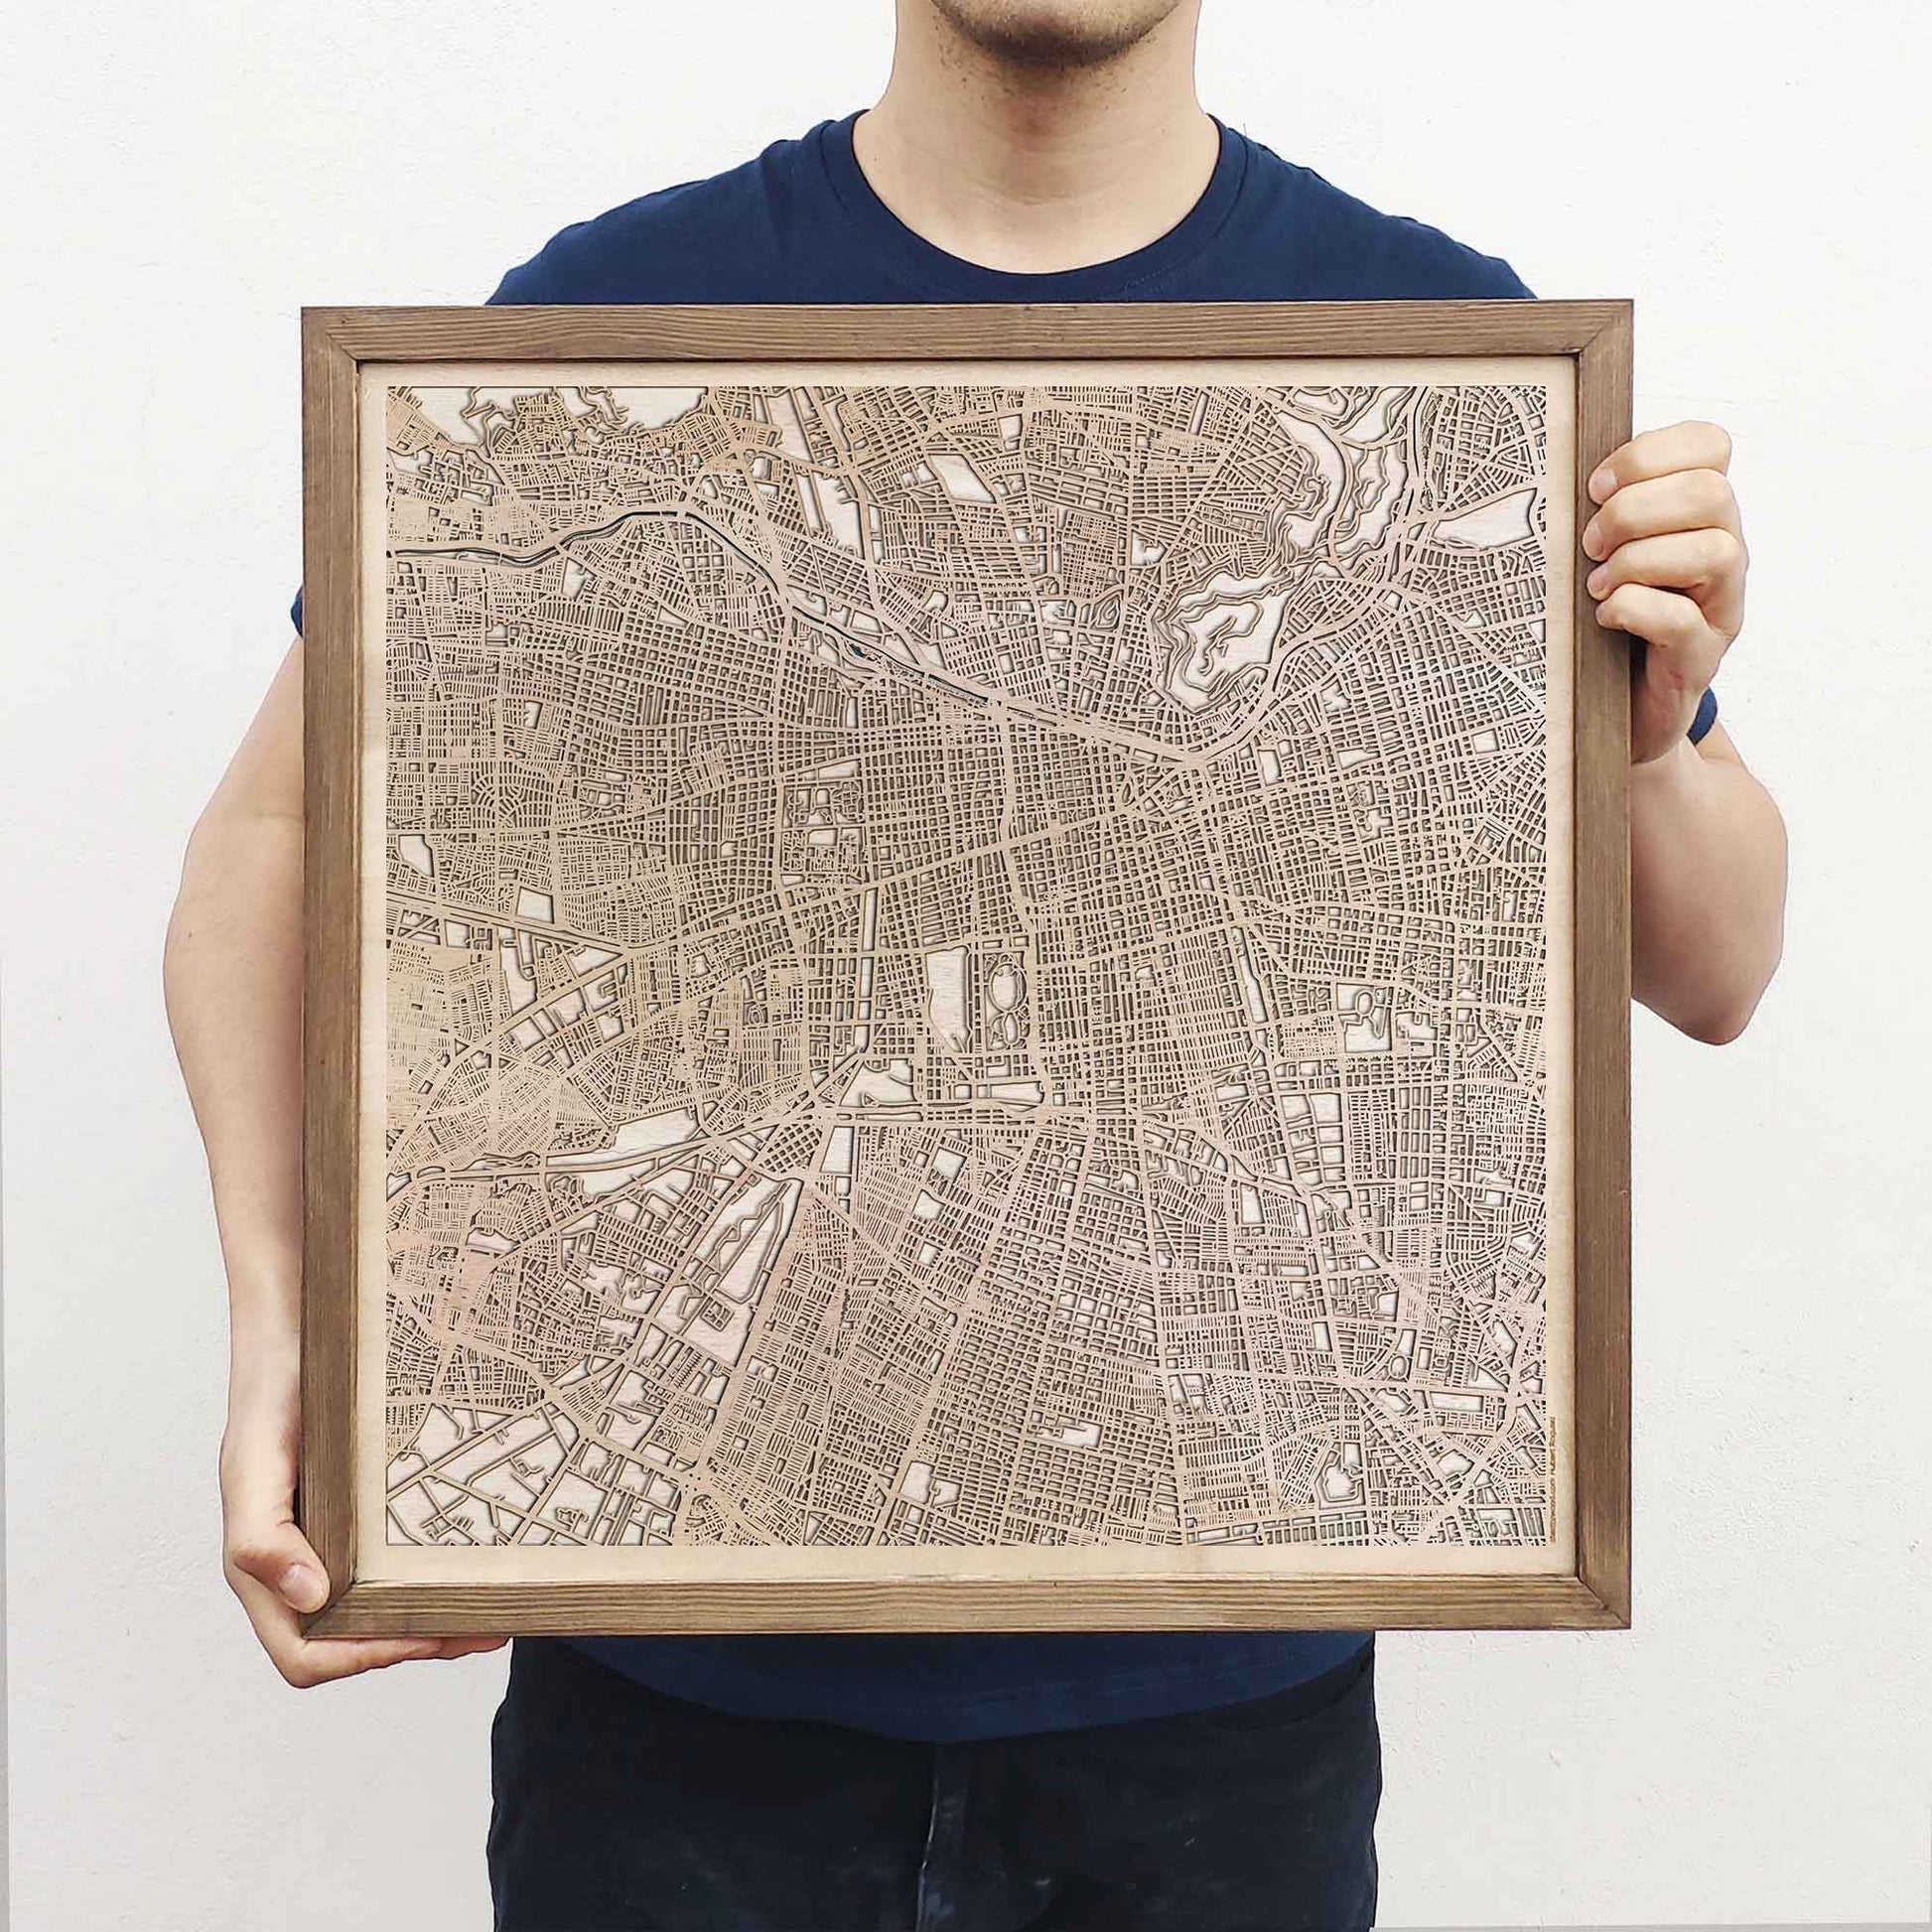 Santiago Wooden Map by CityWood - Custom Wood Map Art - Unique Laser Cut Engraved - Anniversary Gift